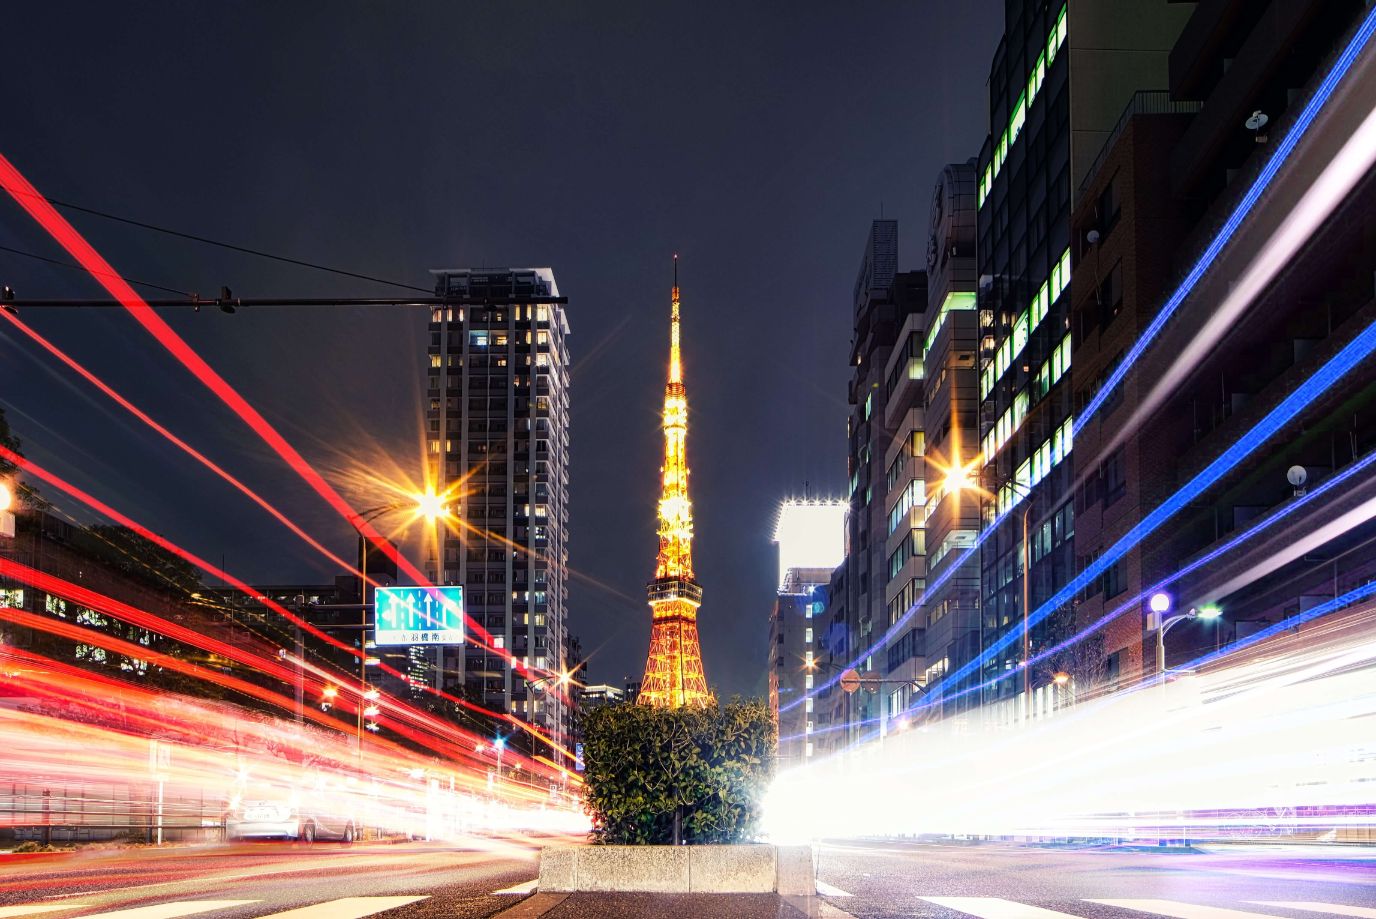 Another epic night photography spot and a secret photography spot of the Tokyo Tower. Set the tripod up and wait for big vehicles to run by you. You cannot set up a big tripod here too because of the limited space.